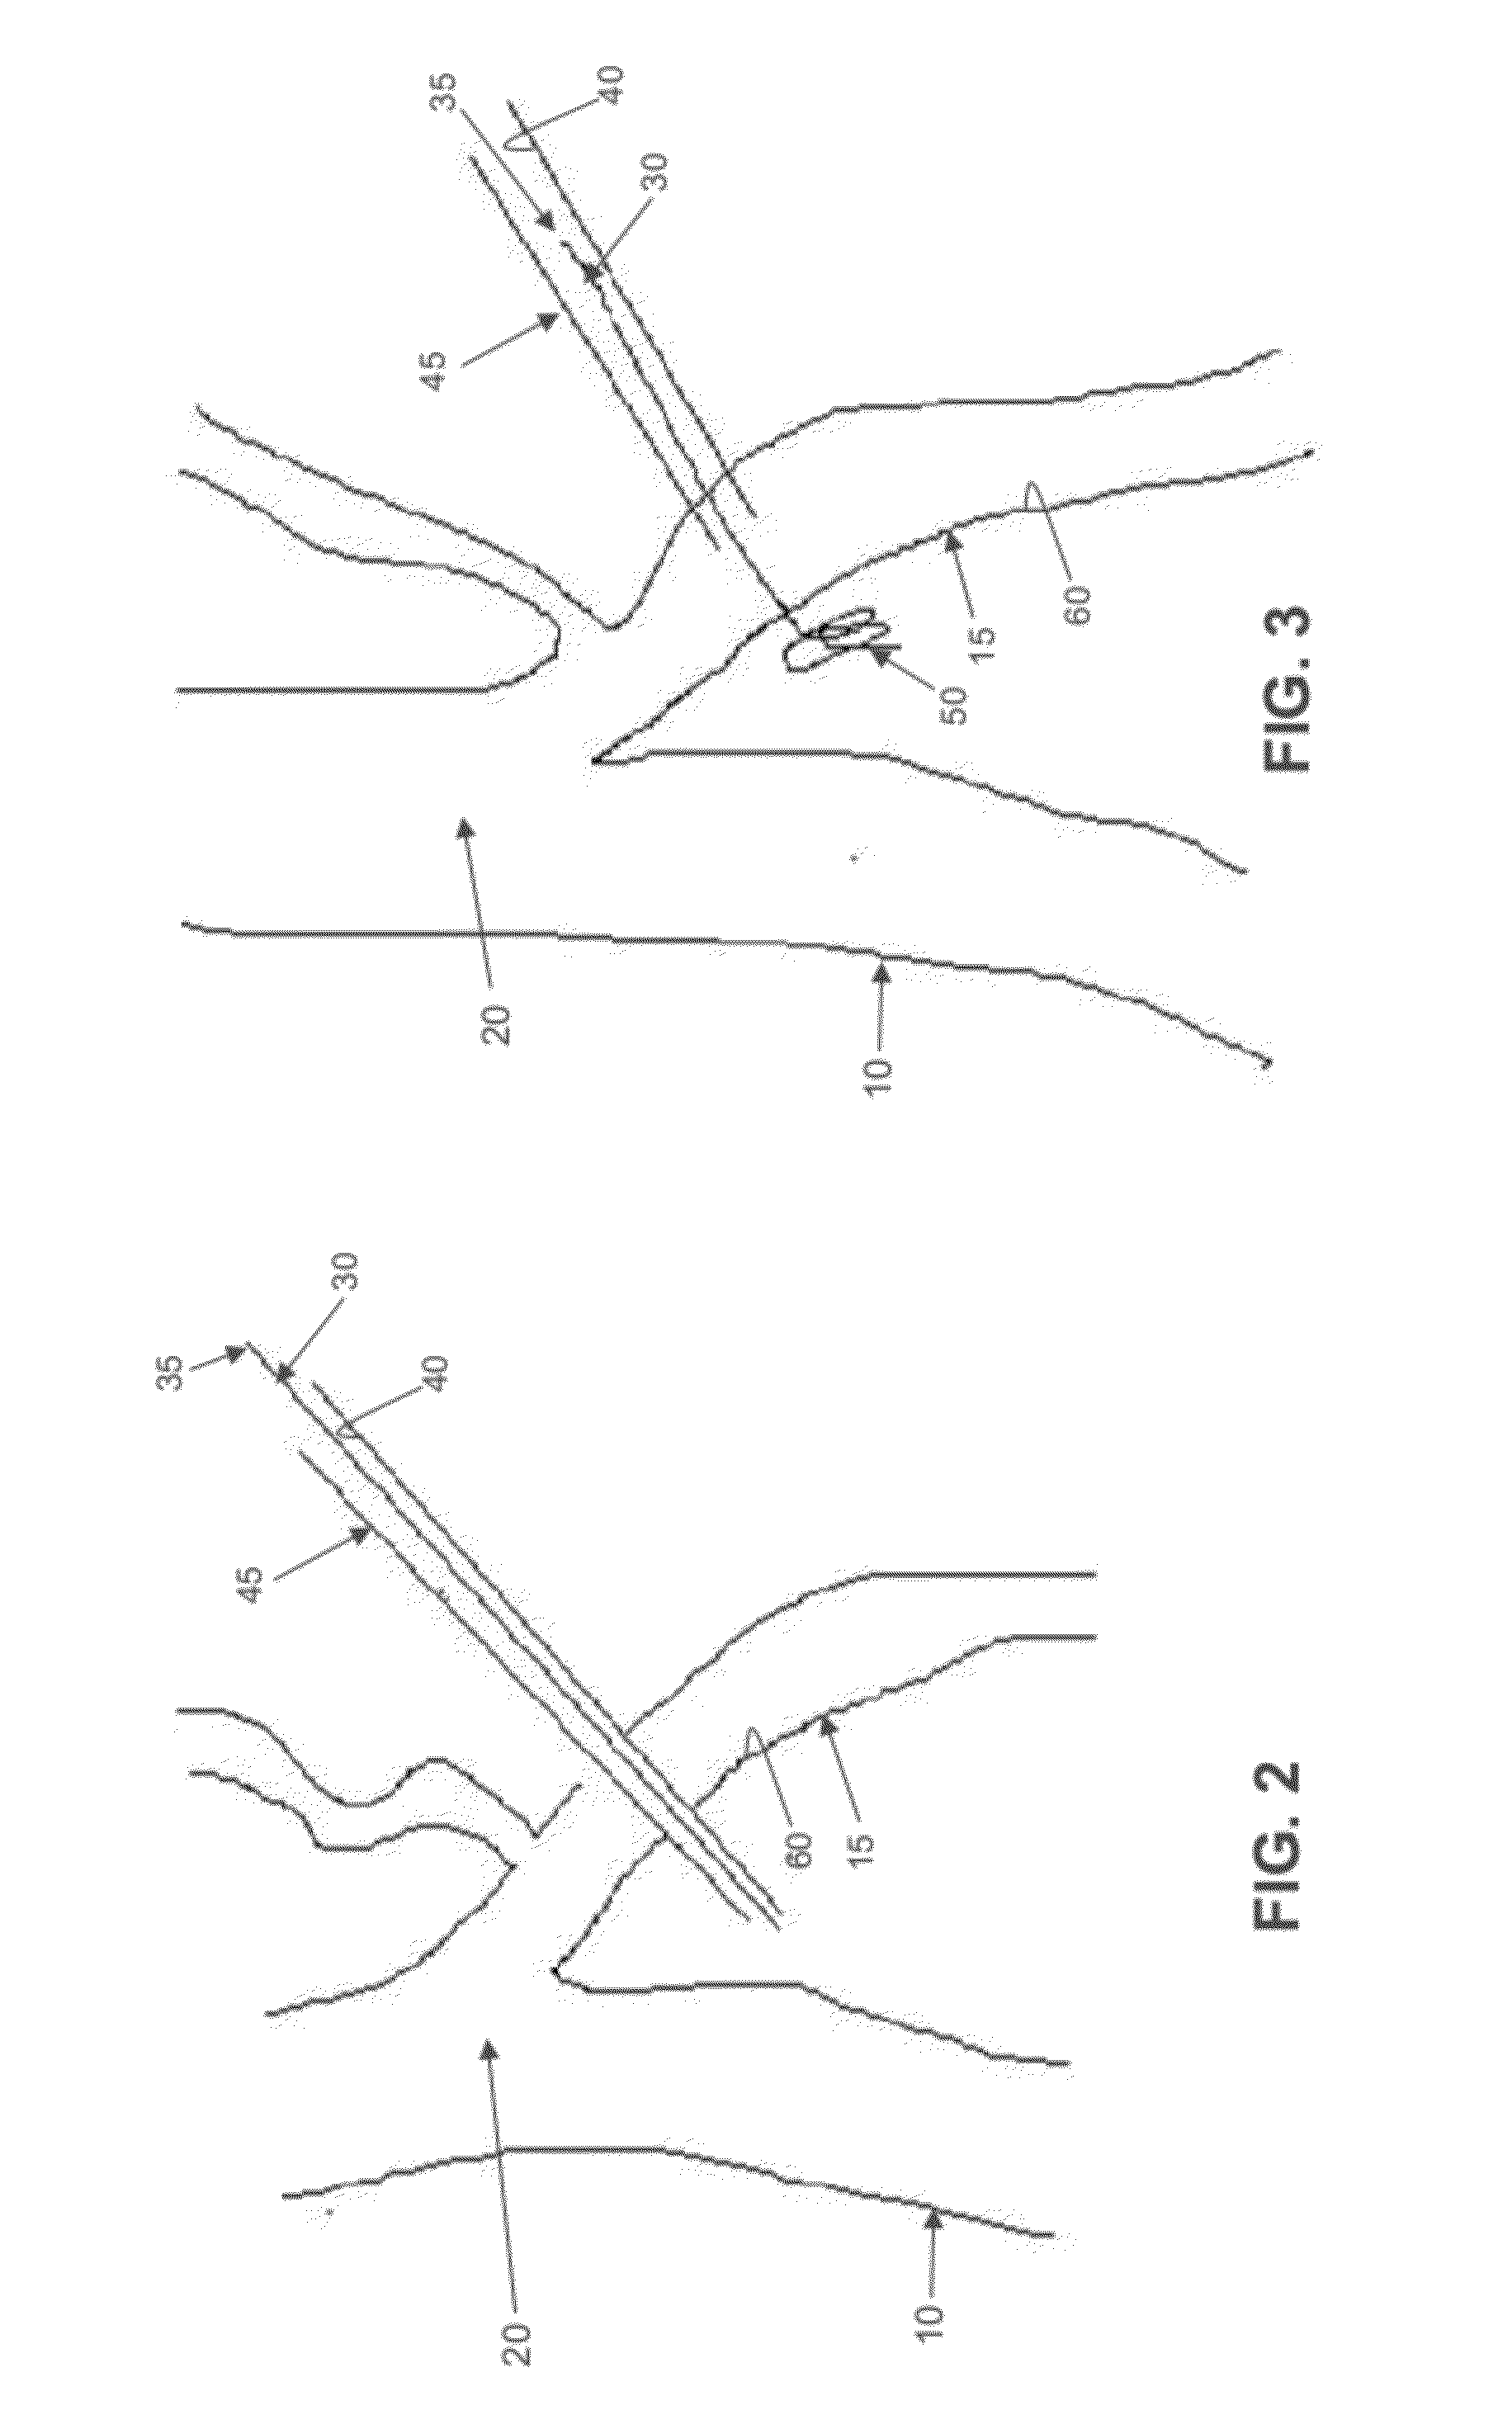 Method and apparatus for treating varicose veins